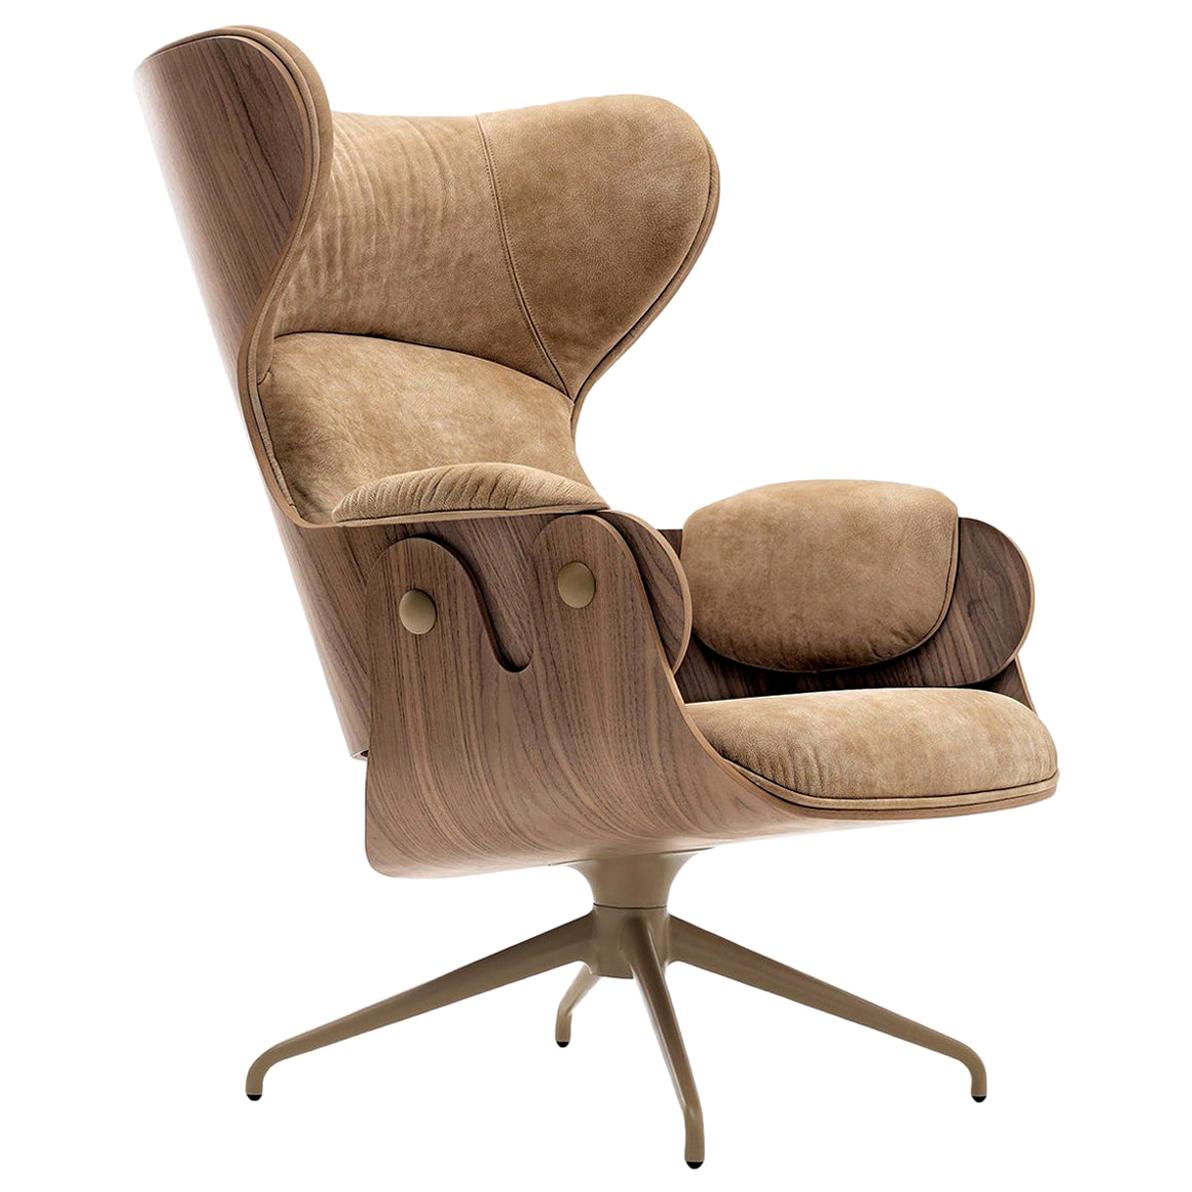 Jaime Hayon, Contemporary, Playwood Walnut Leather Upholstery Lounger Armchair 